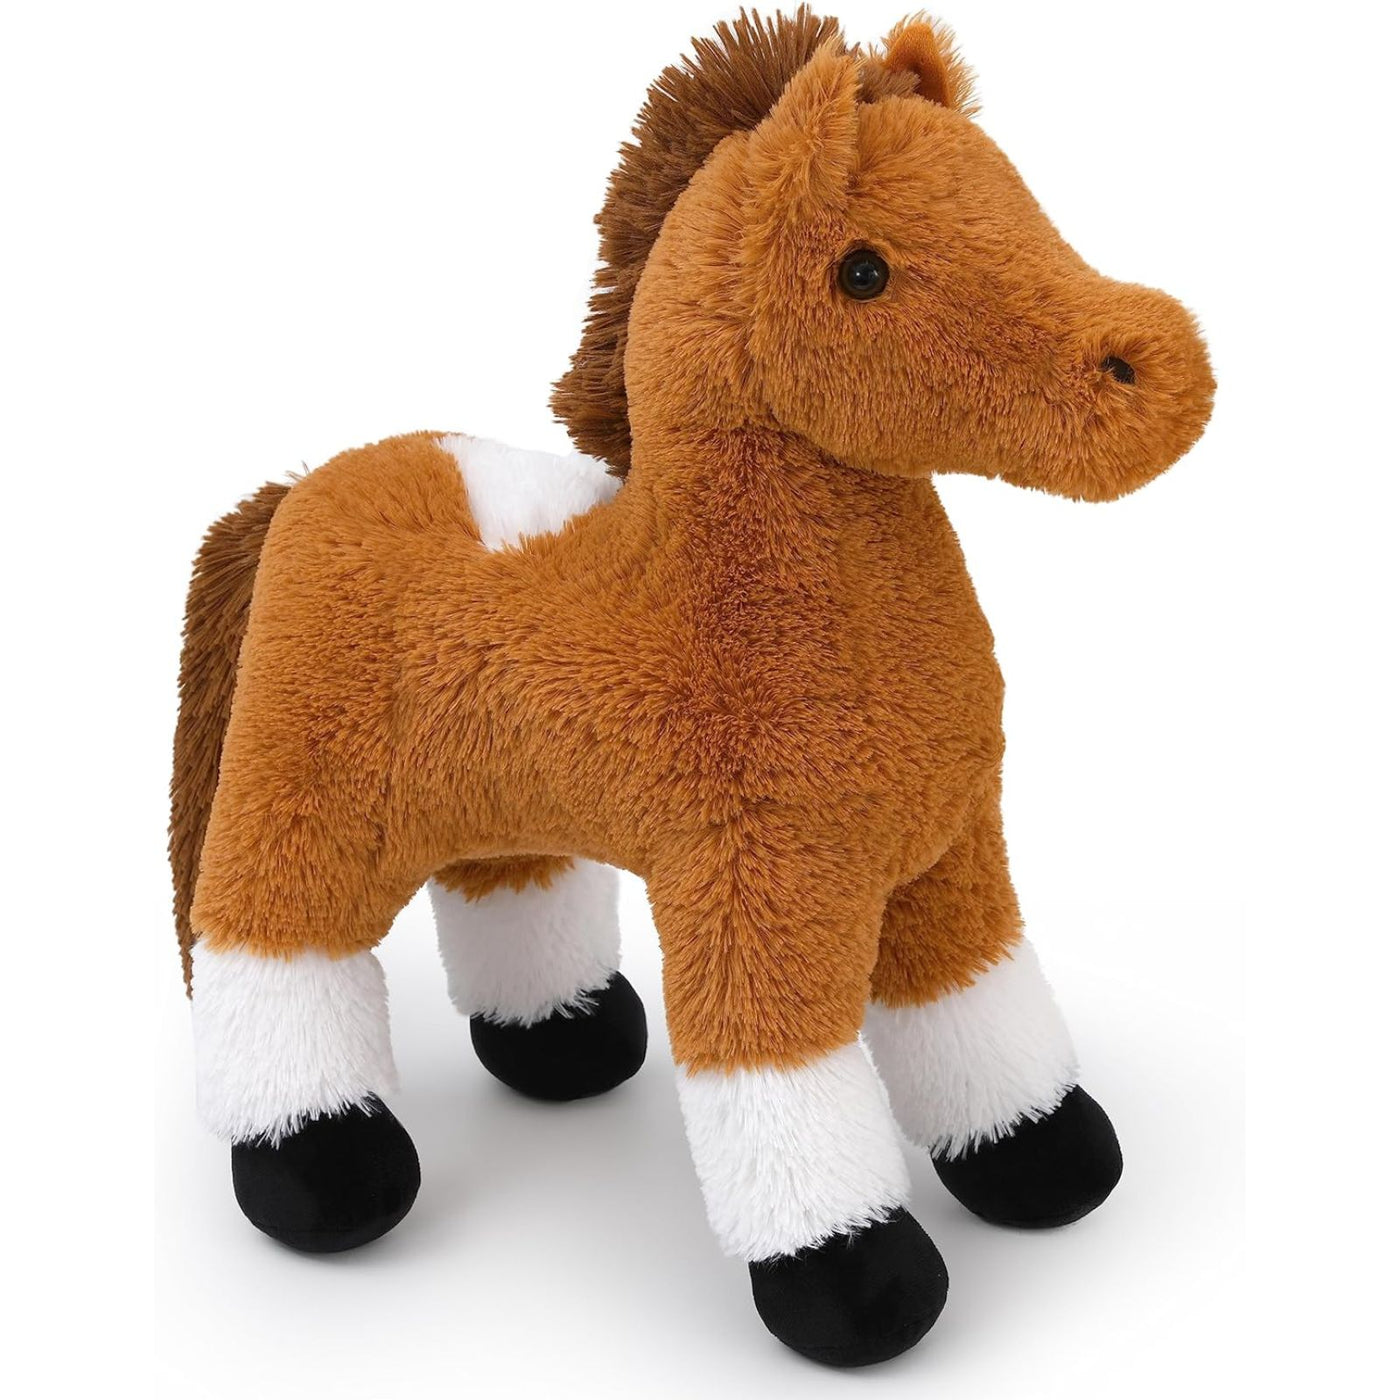 Horse Stuffed Toy, Brown, 20 Inches - MorisMos Stuffed Animals